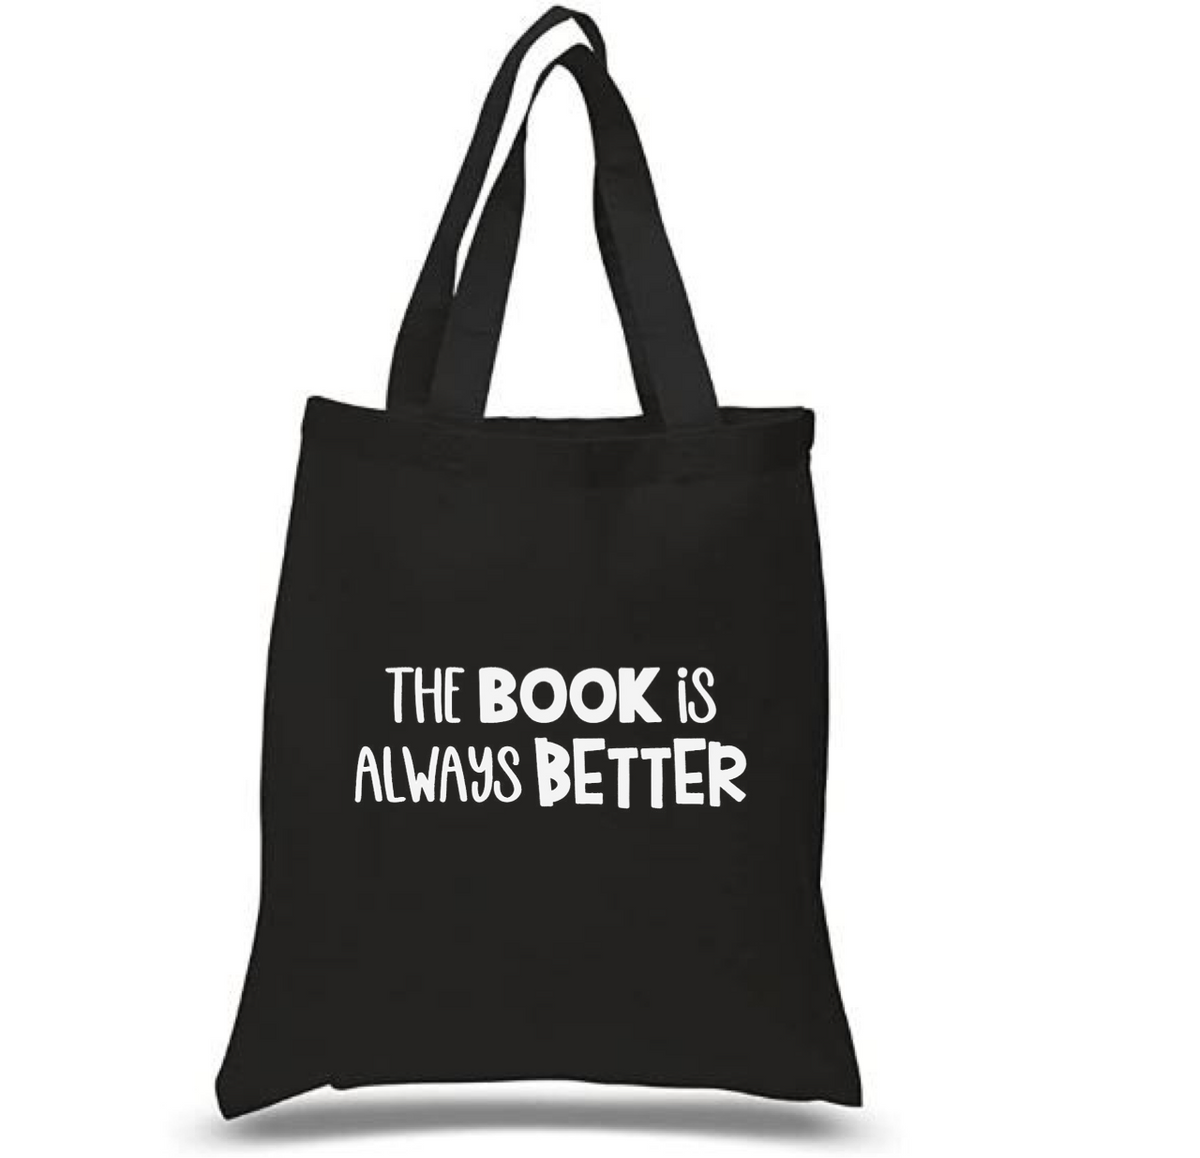 Tote Bag: The Book is Always Better